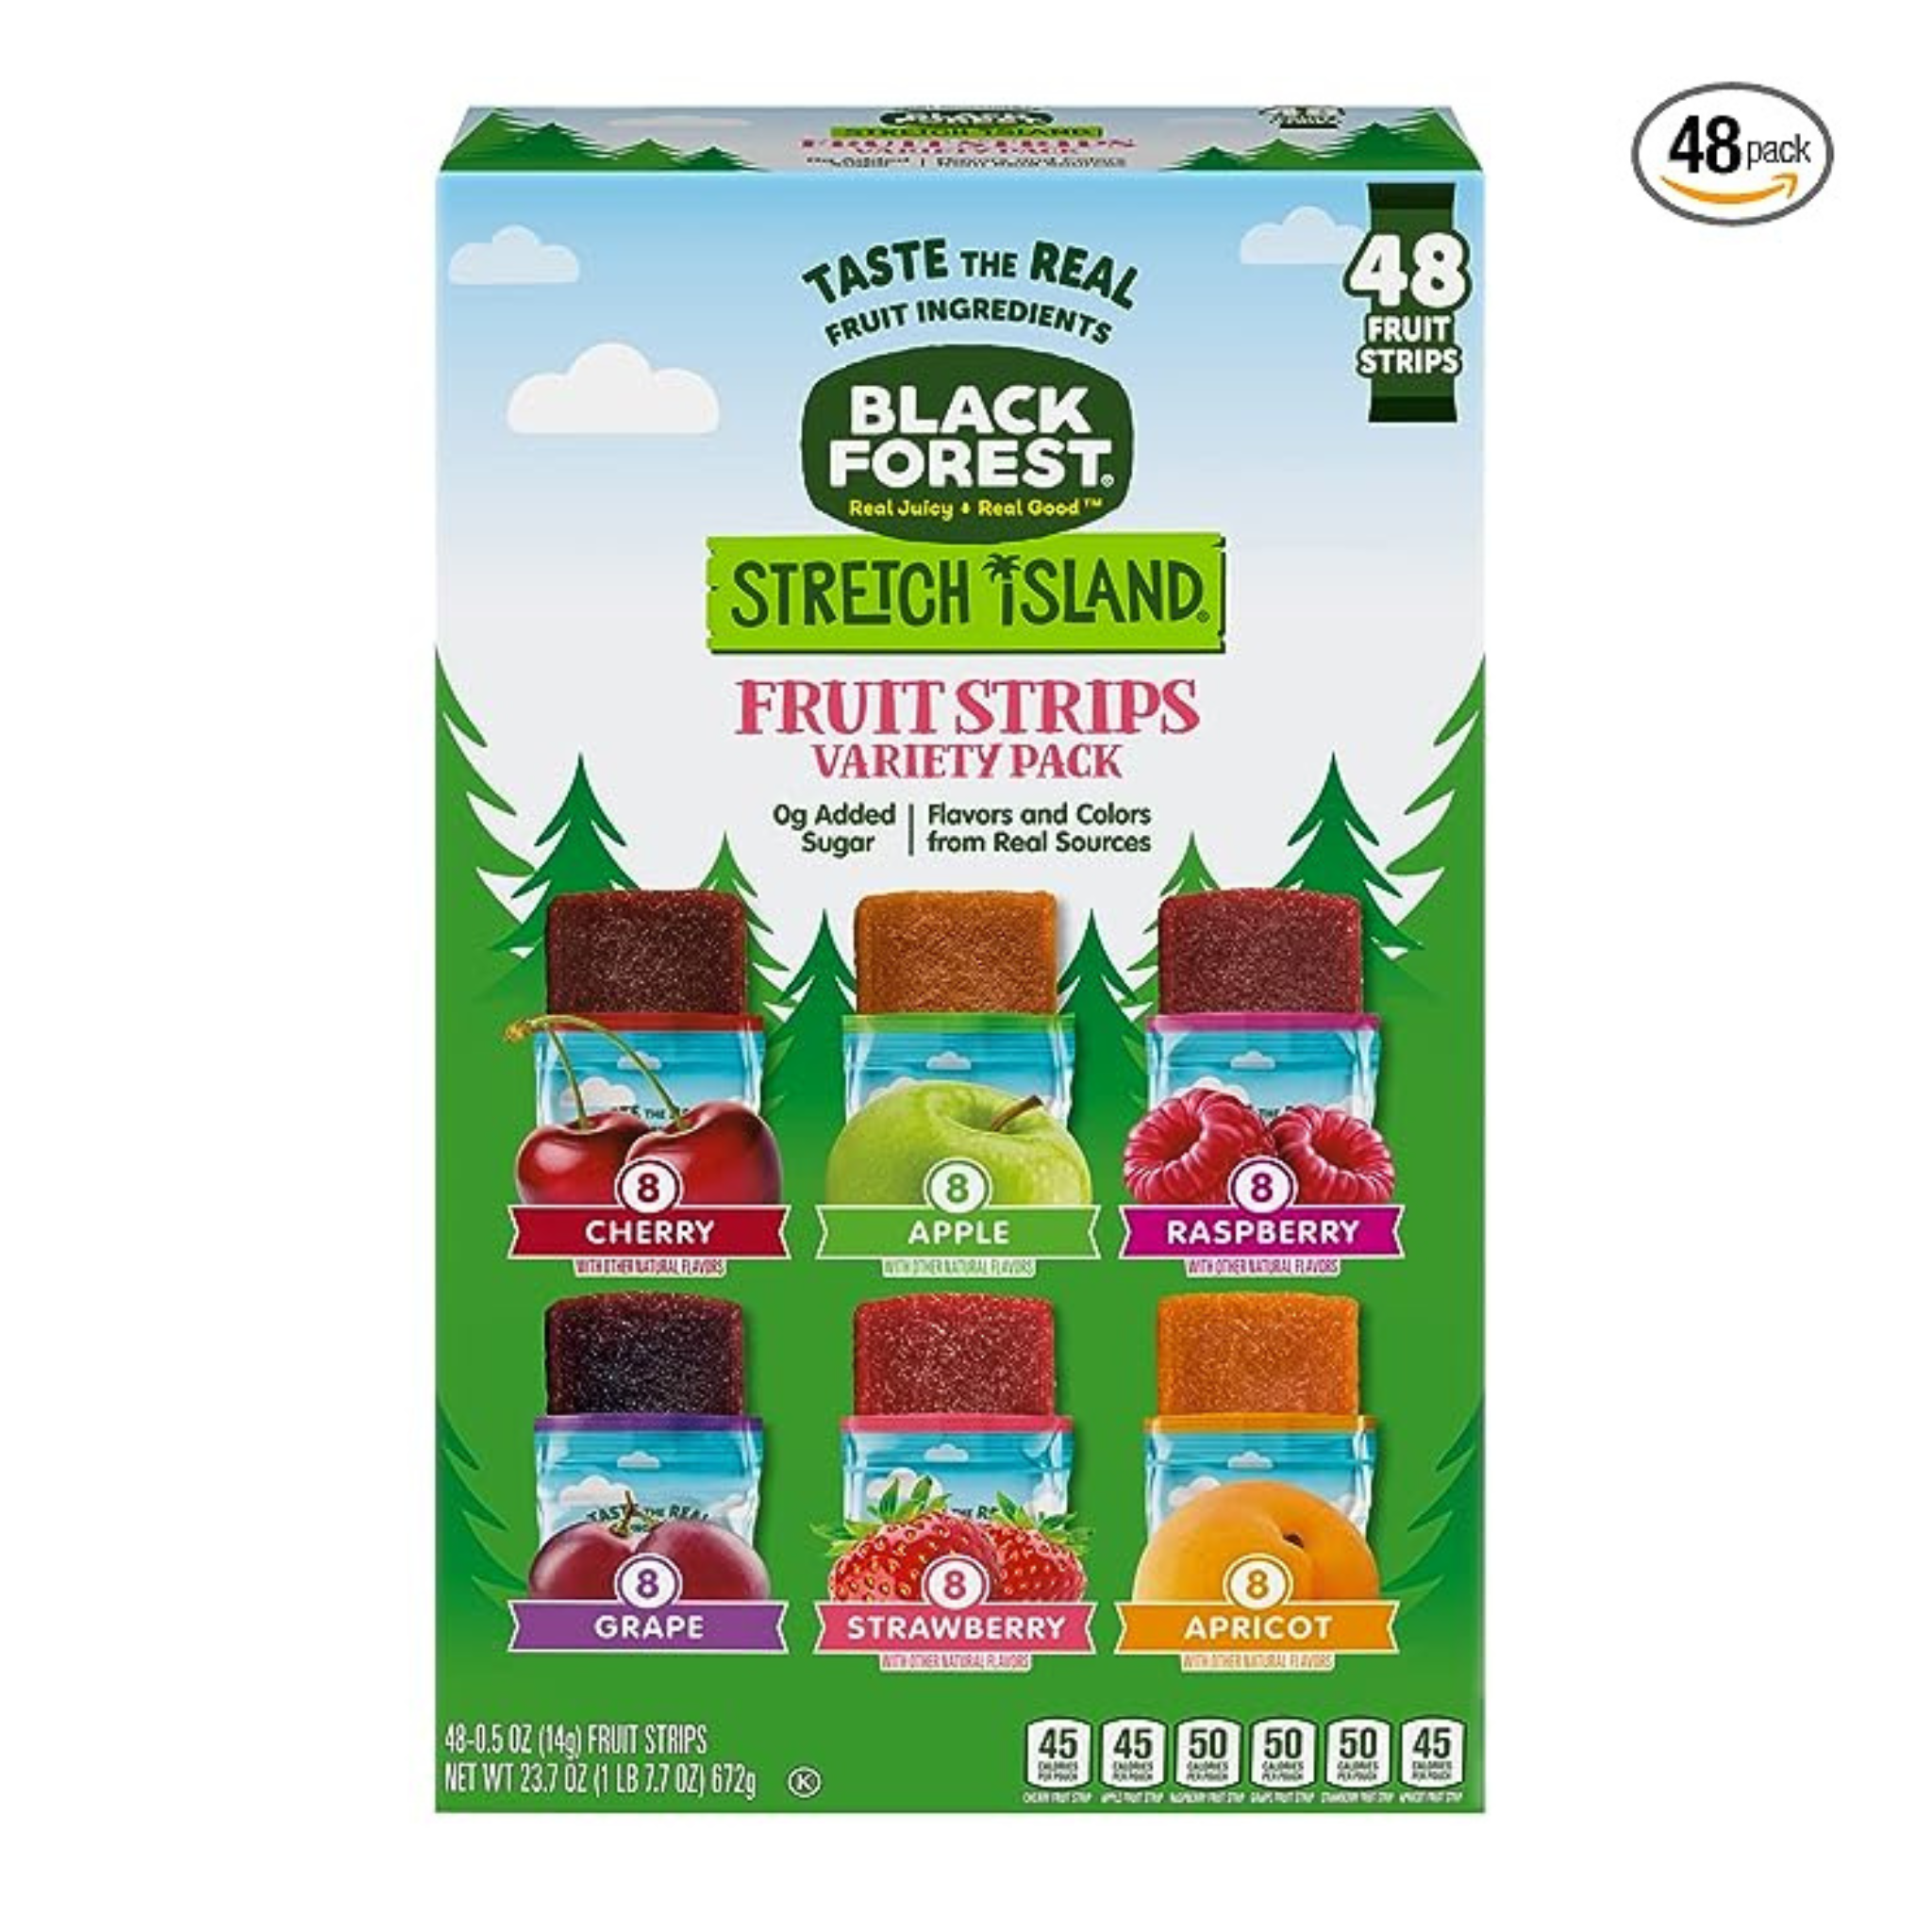 48 Pack Of Stretch Island Black Forest Fruit Strips Variety Pack